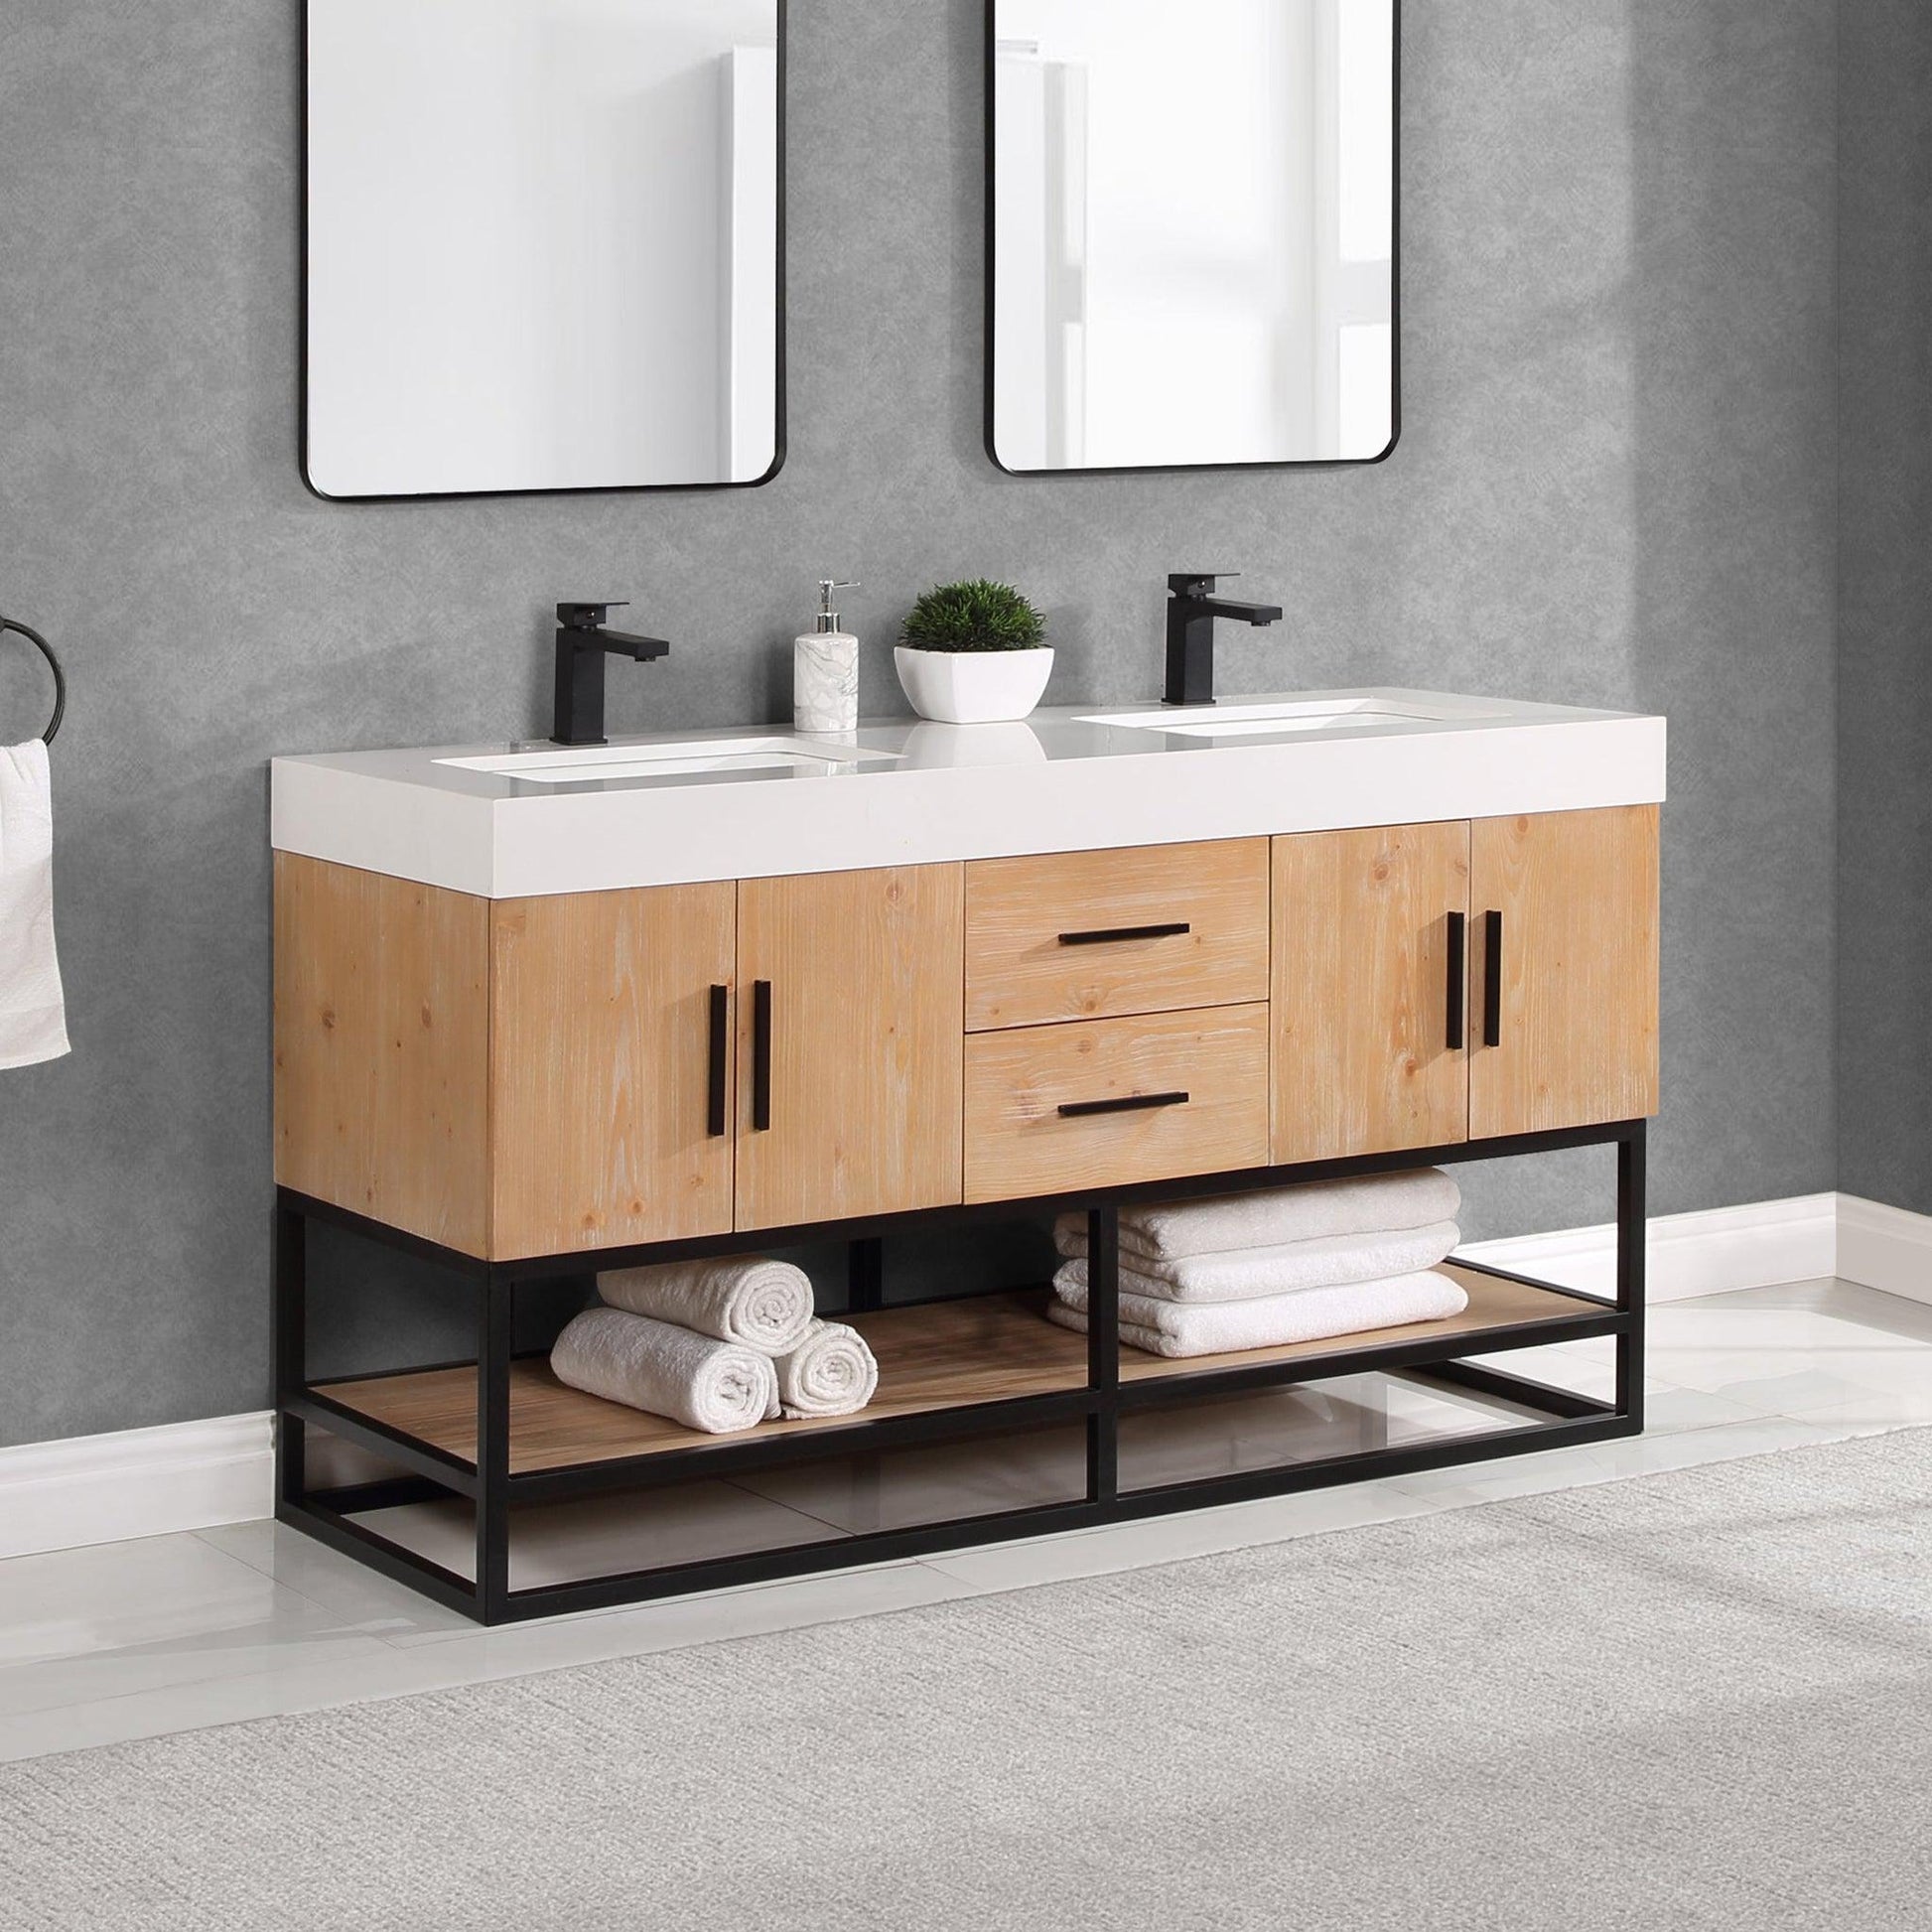 Altair Bianco 60" Light Brown Freestanding Double Bathroom Vanity Set With Matte Black Support Base, White Composite Stone Top, Two Rectangular Undermount Ceramic Sinks, and Overflow